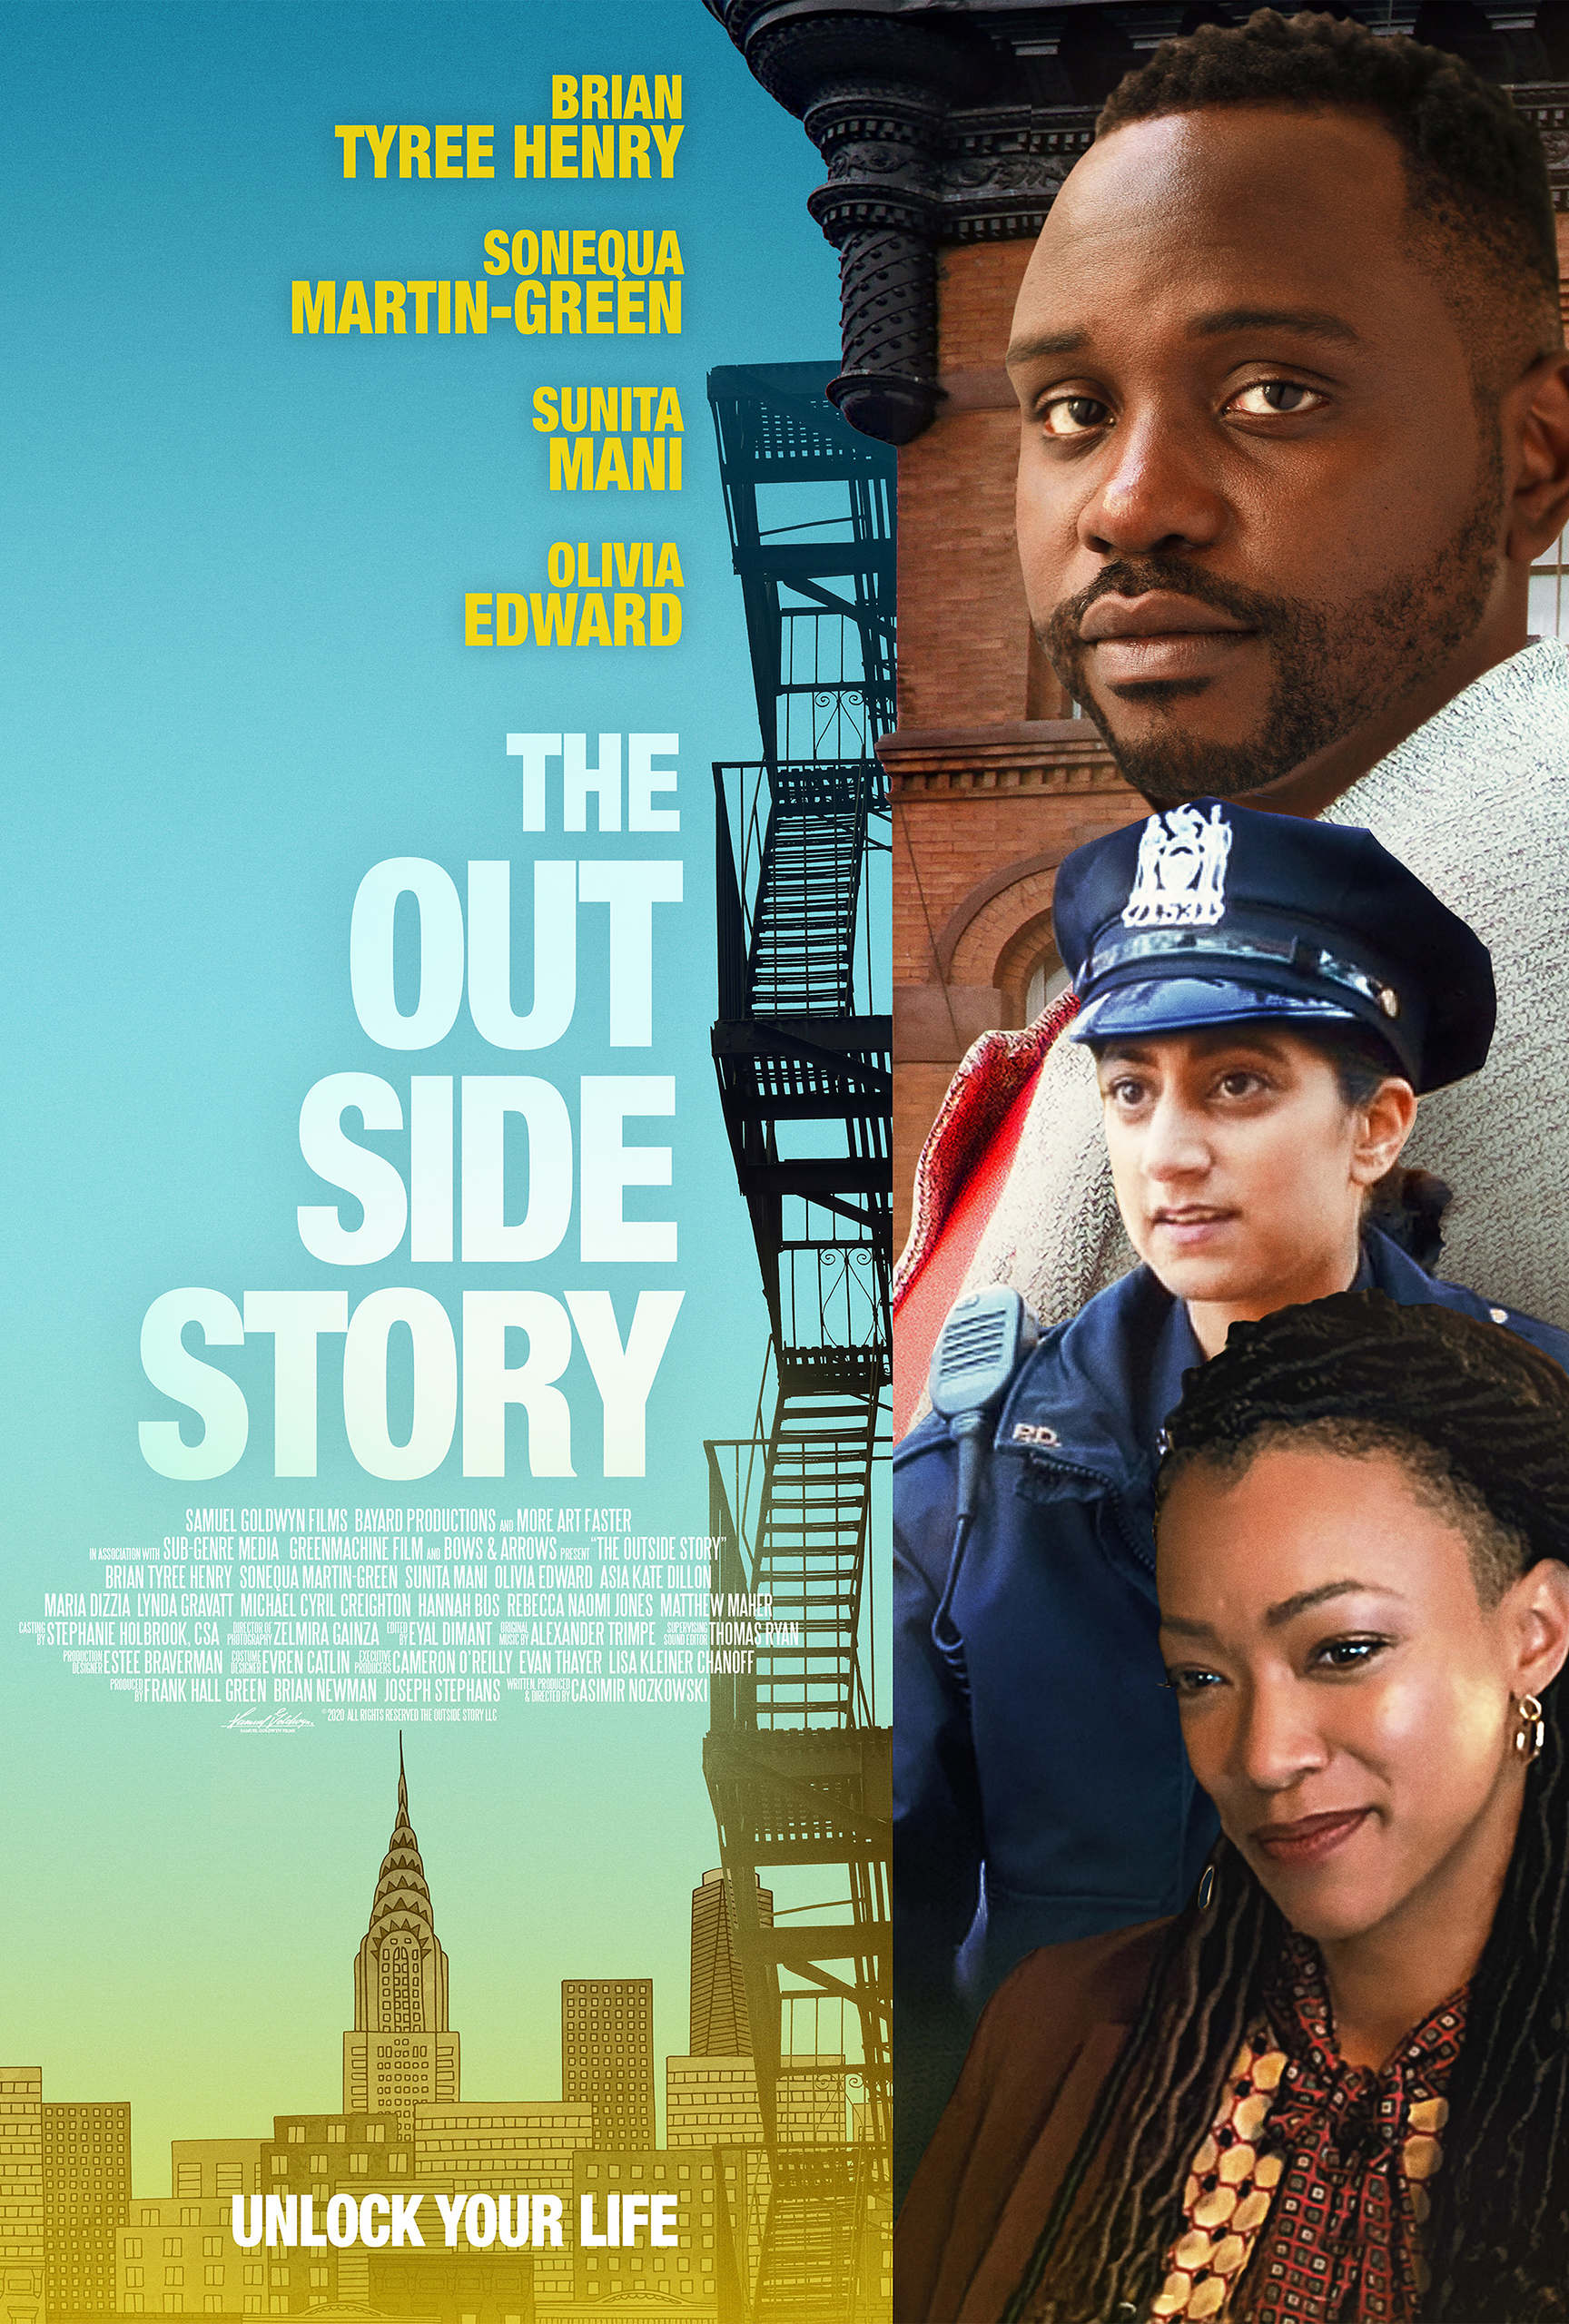 1st Trailer For 'The Outside Story' Movie Starring Brian Tyree Henry